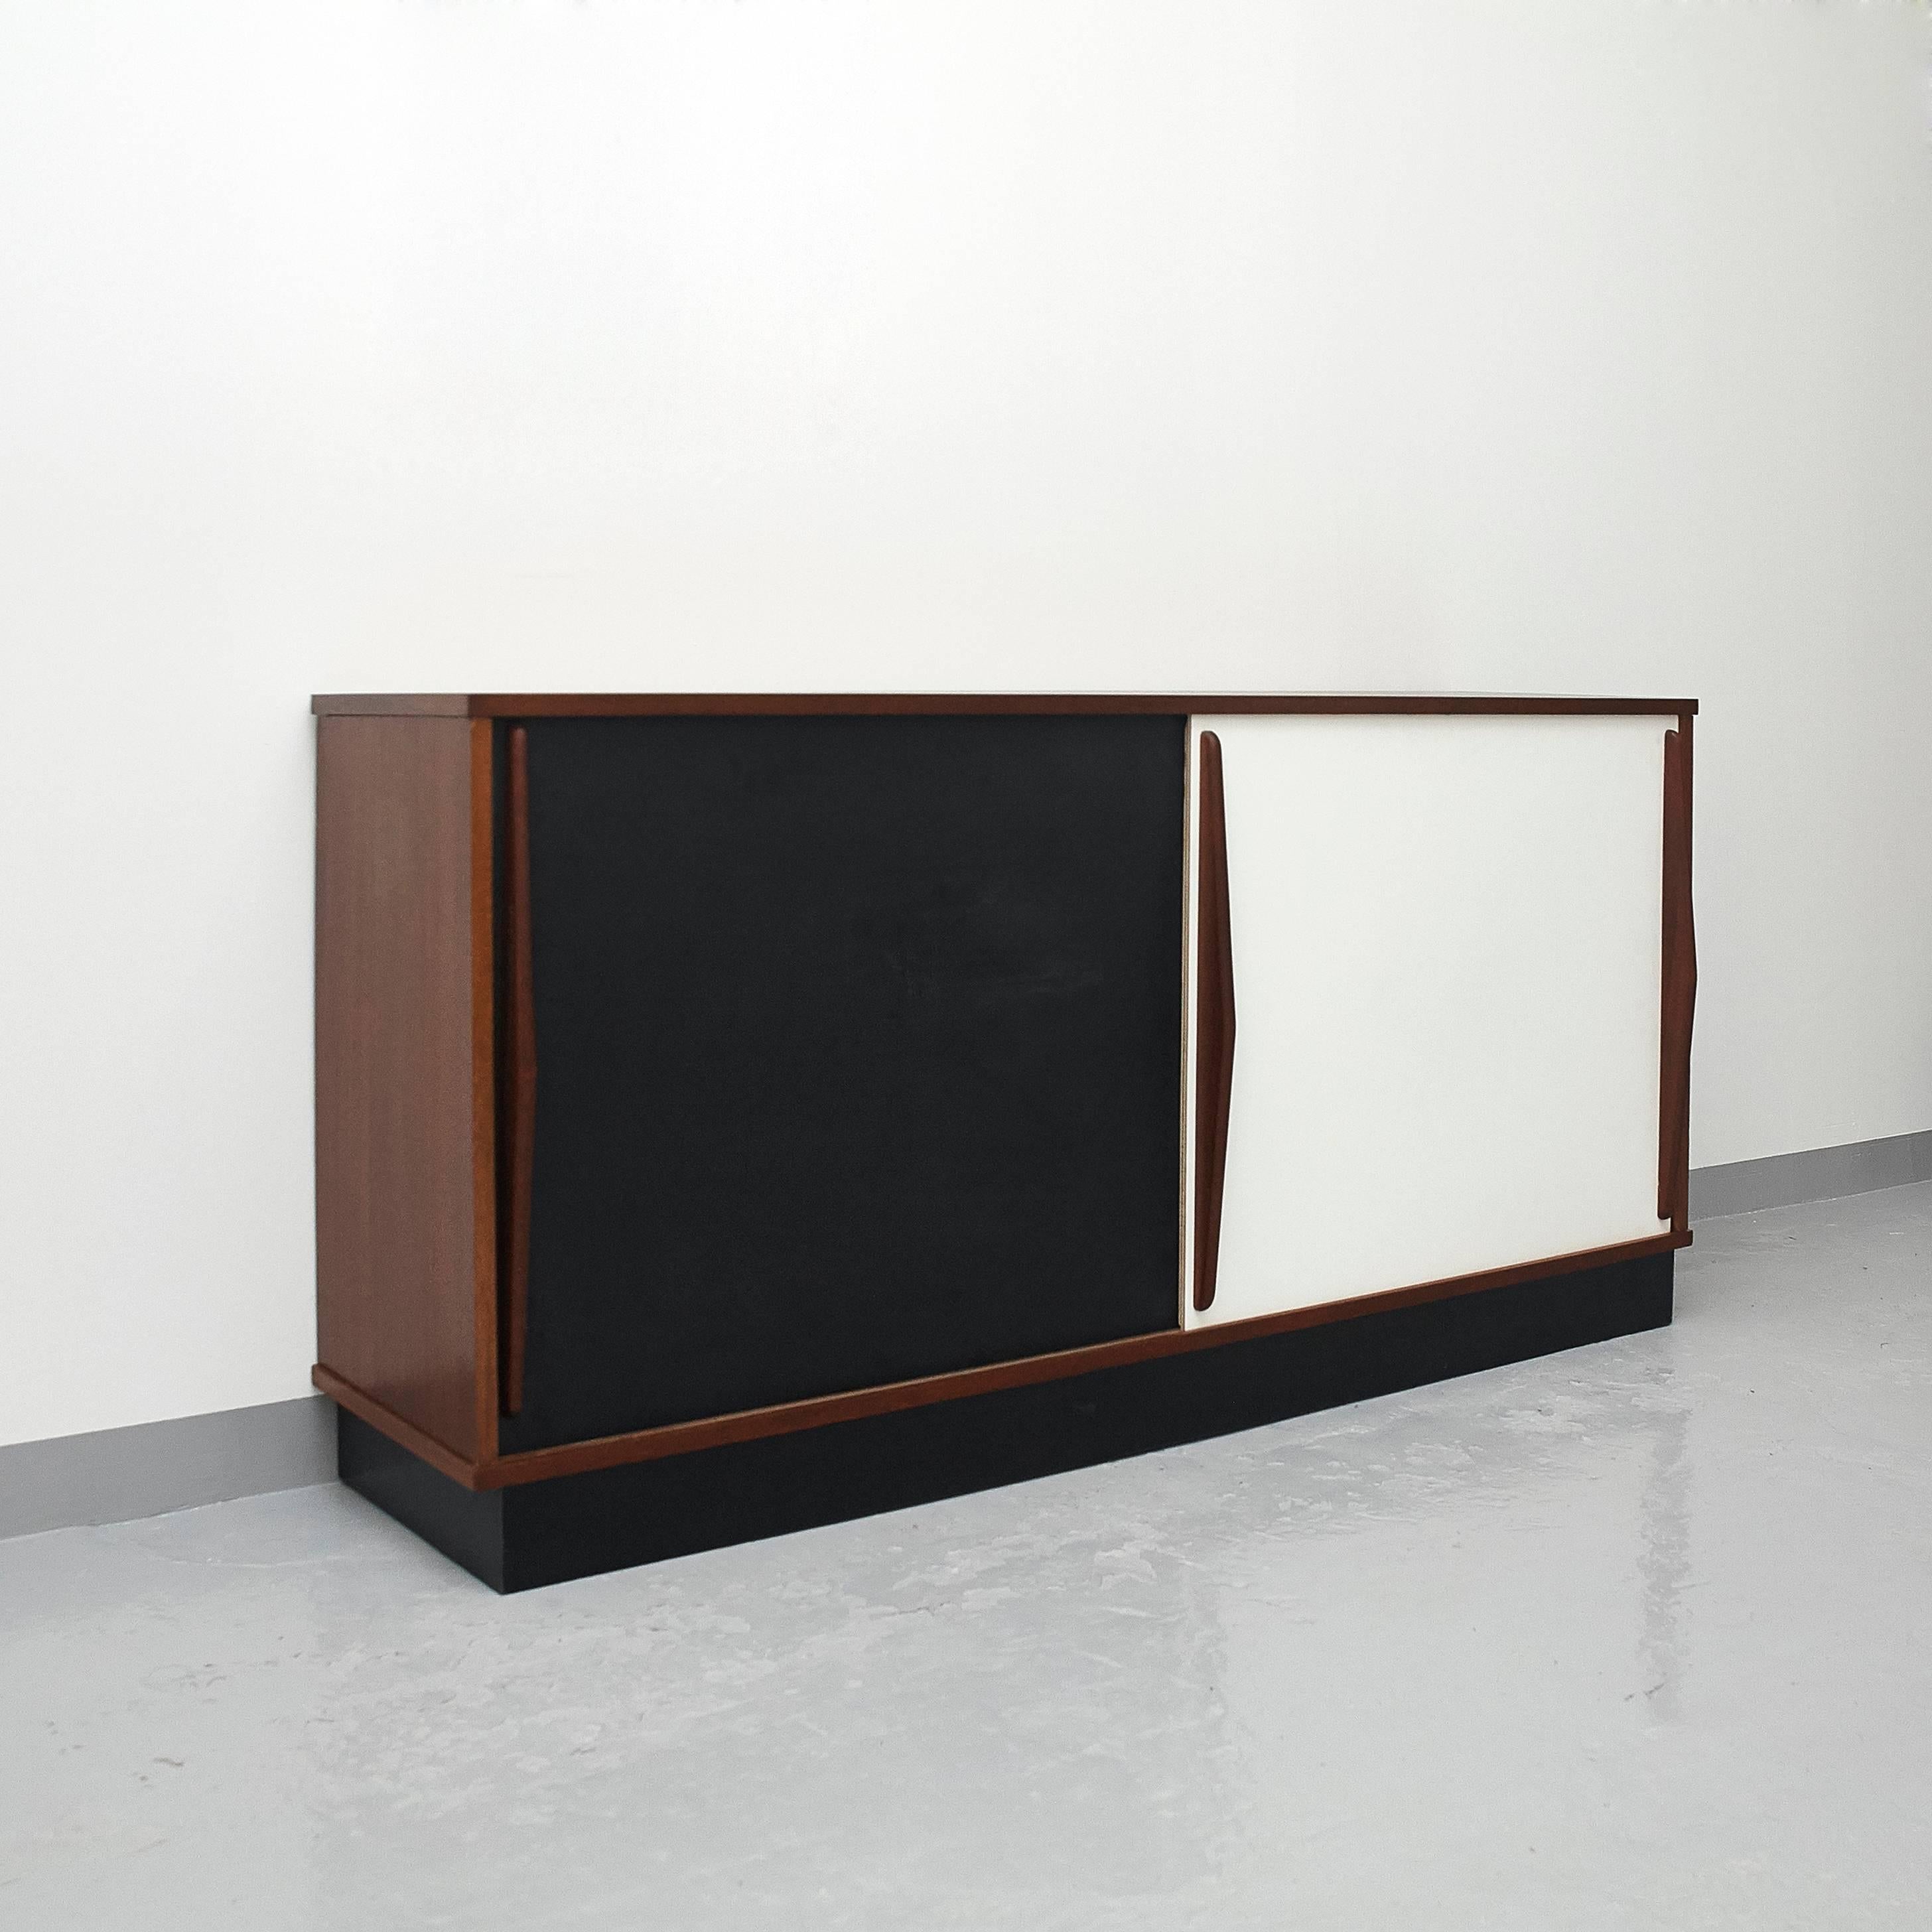 Sideboard designed by Charlotte Perriand, circa 1950.
Edited by Steph Simon (France)

Wood structure and grips, lacquered sliding doors.

Provenence: Cansado, Mauritania (Africa)

In original condition, with wear consistent with age and use,